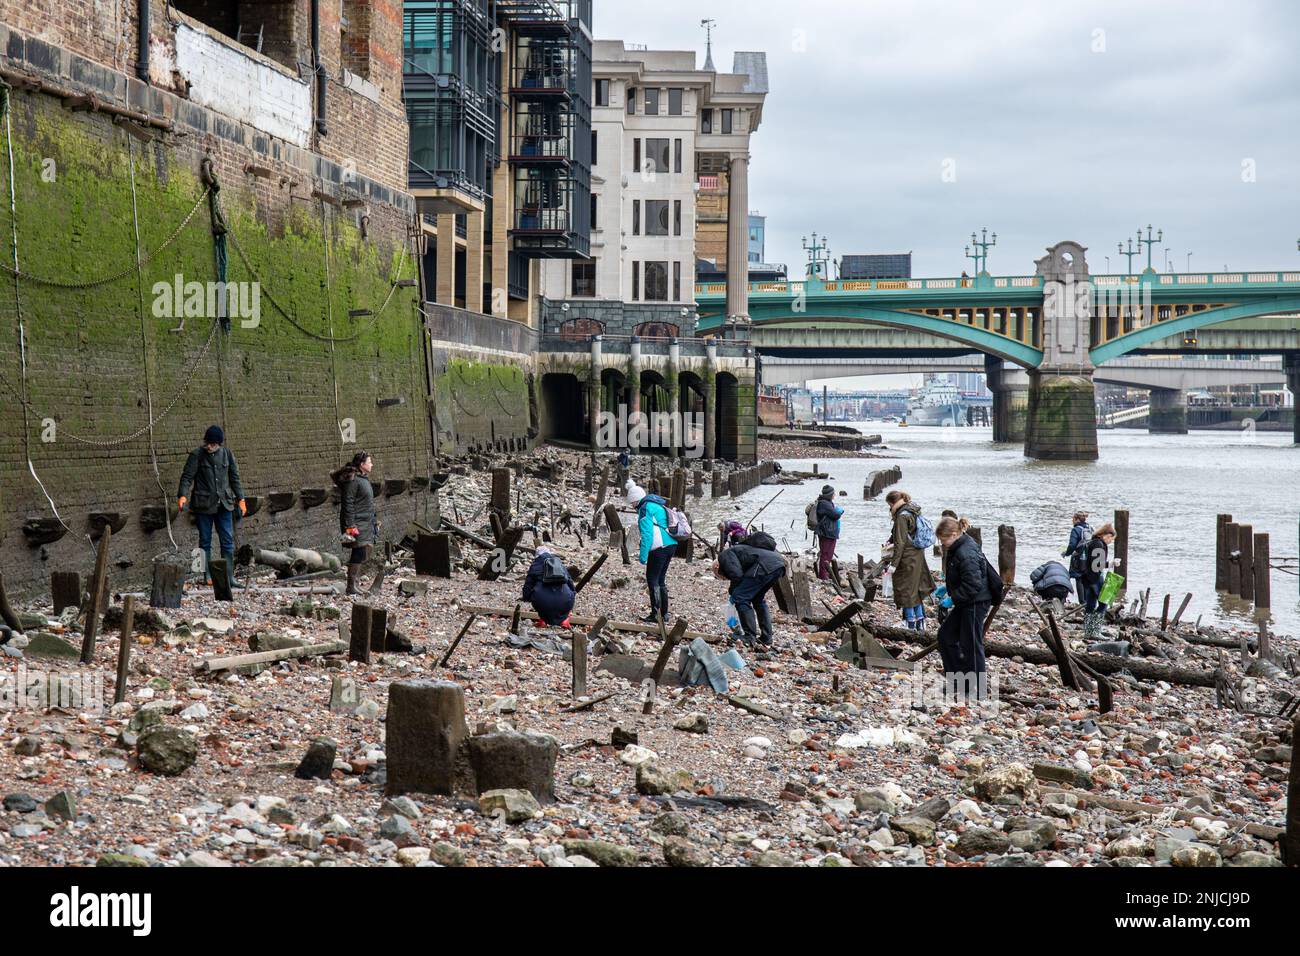 Mudlarkers mudlarking on the rocky foreshore of River Thames at low tide in London, England Stock Photo